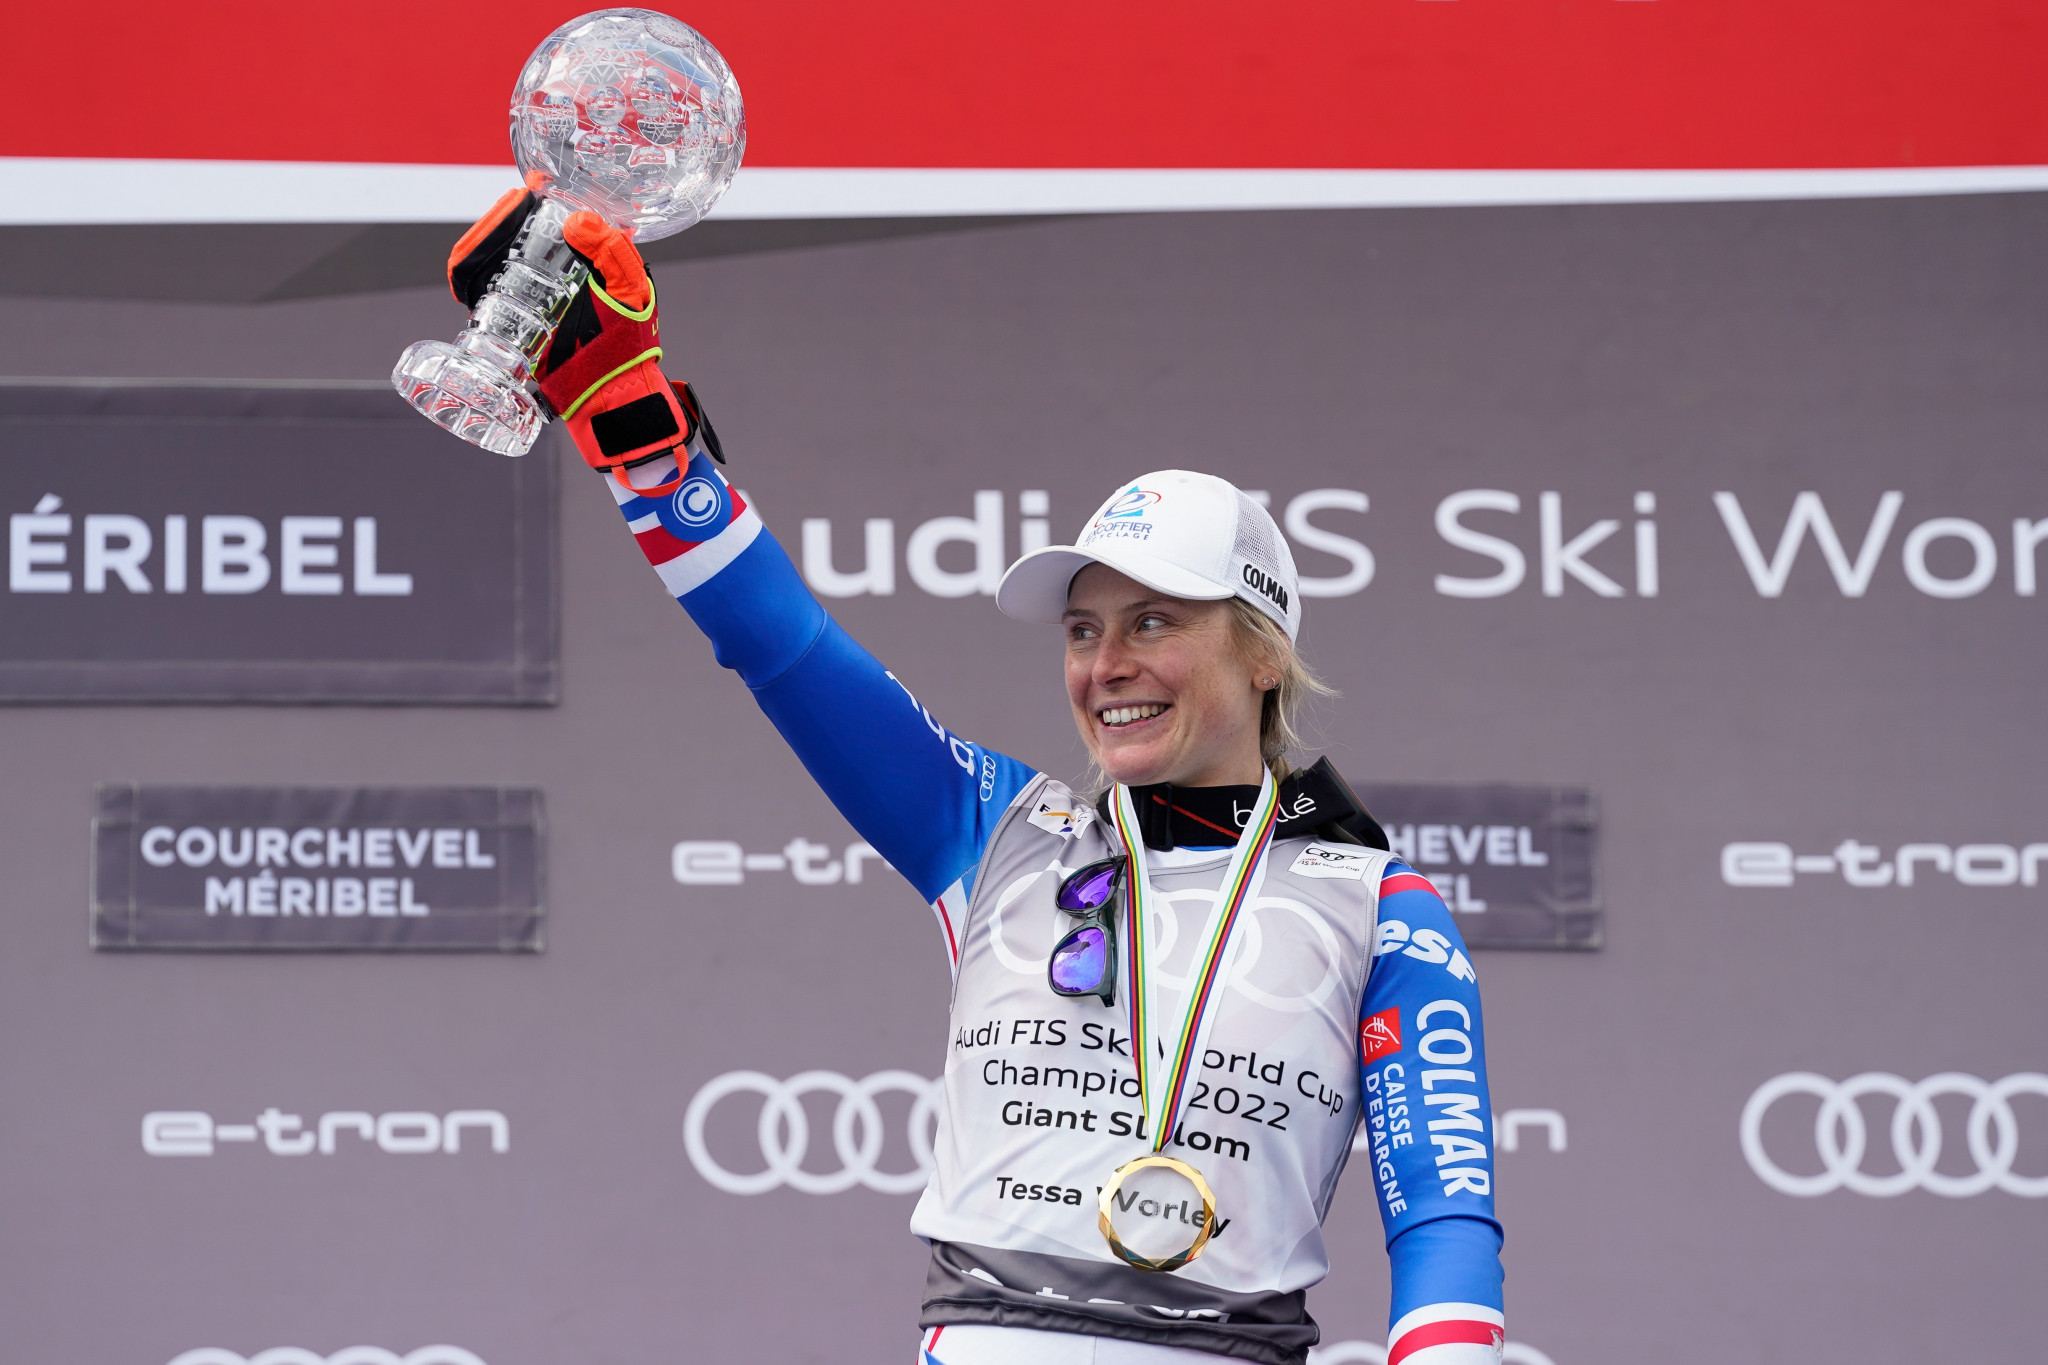 Worley to retire at conclusion of Alpine skiing season